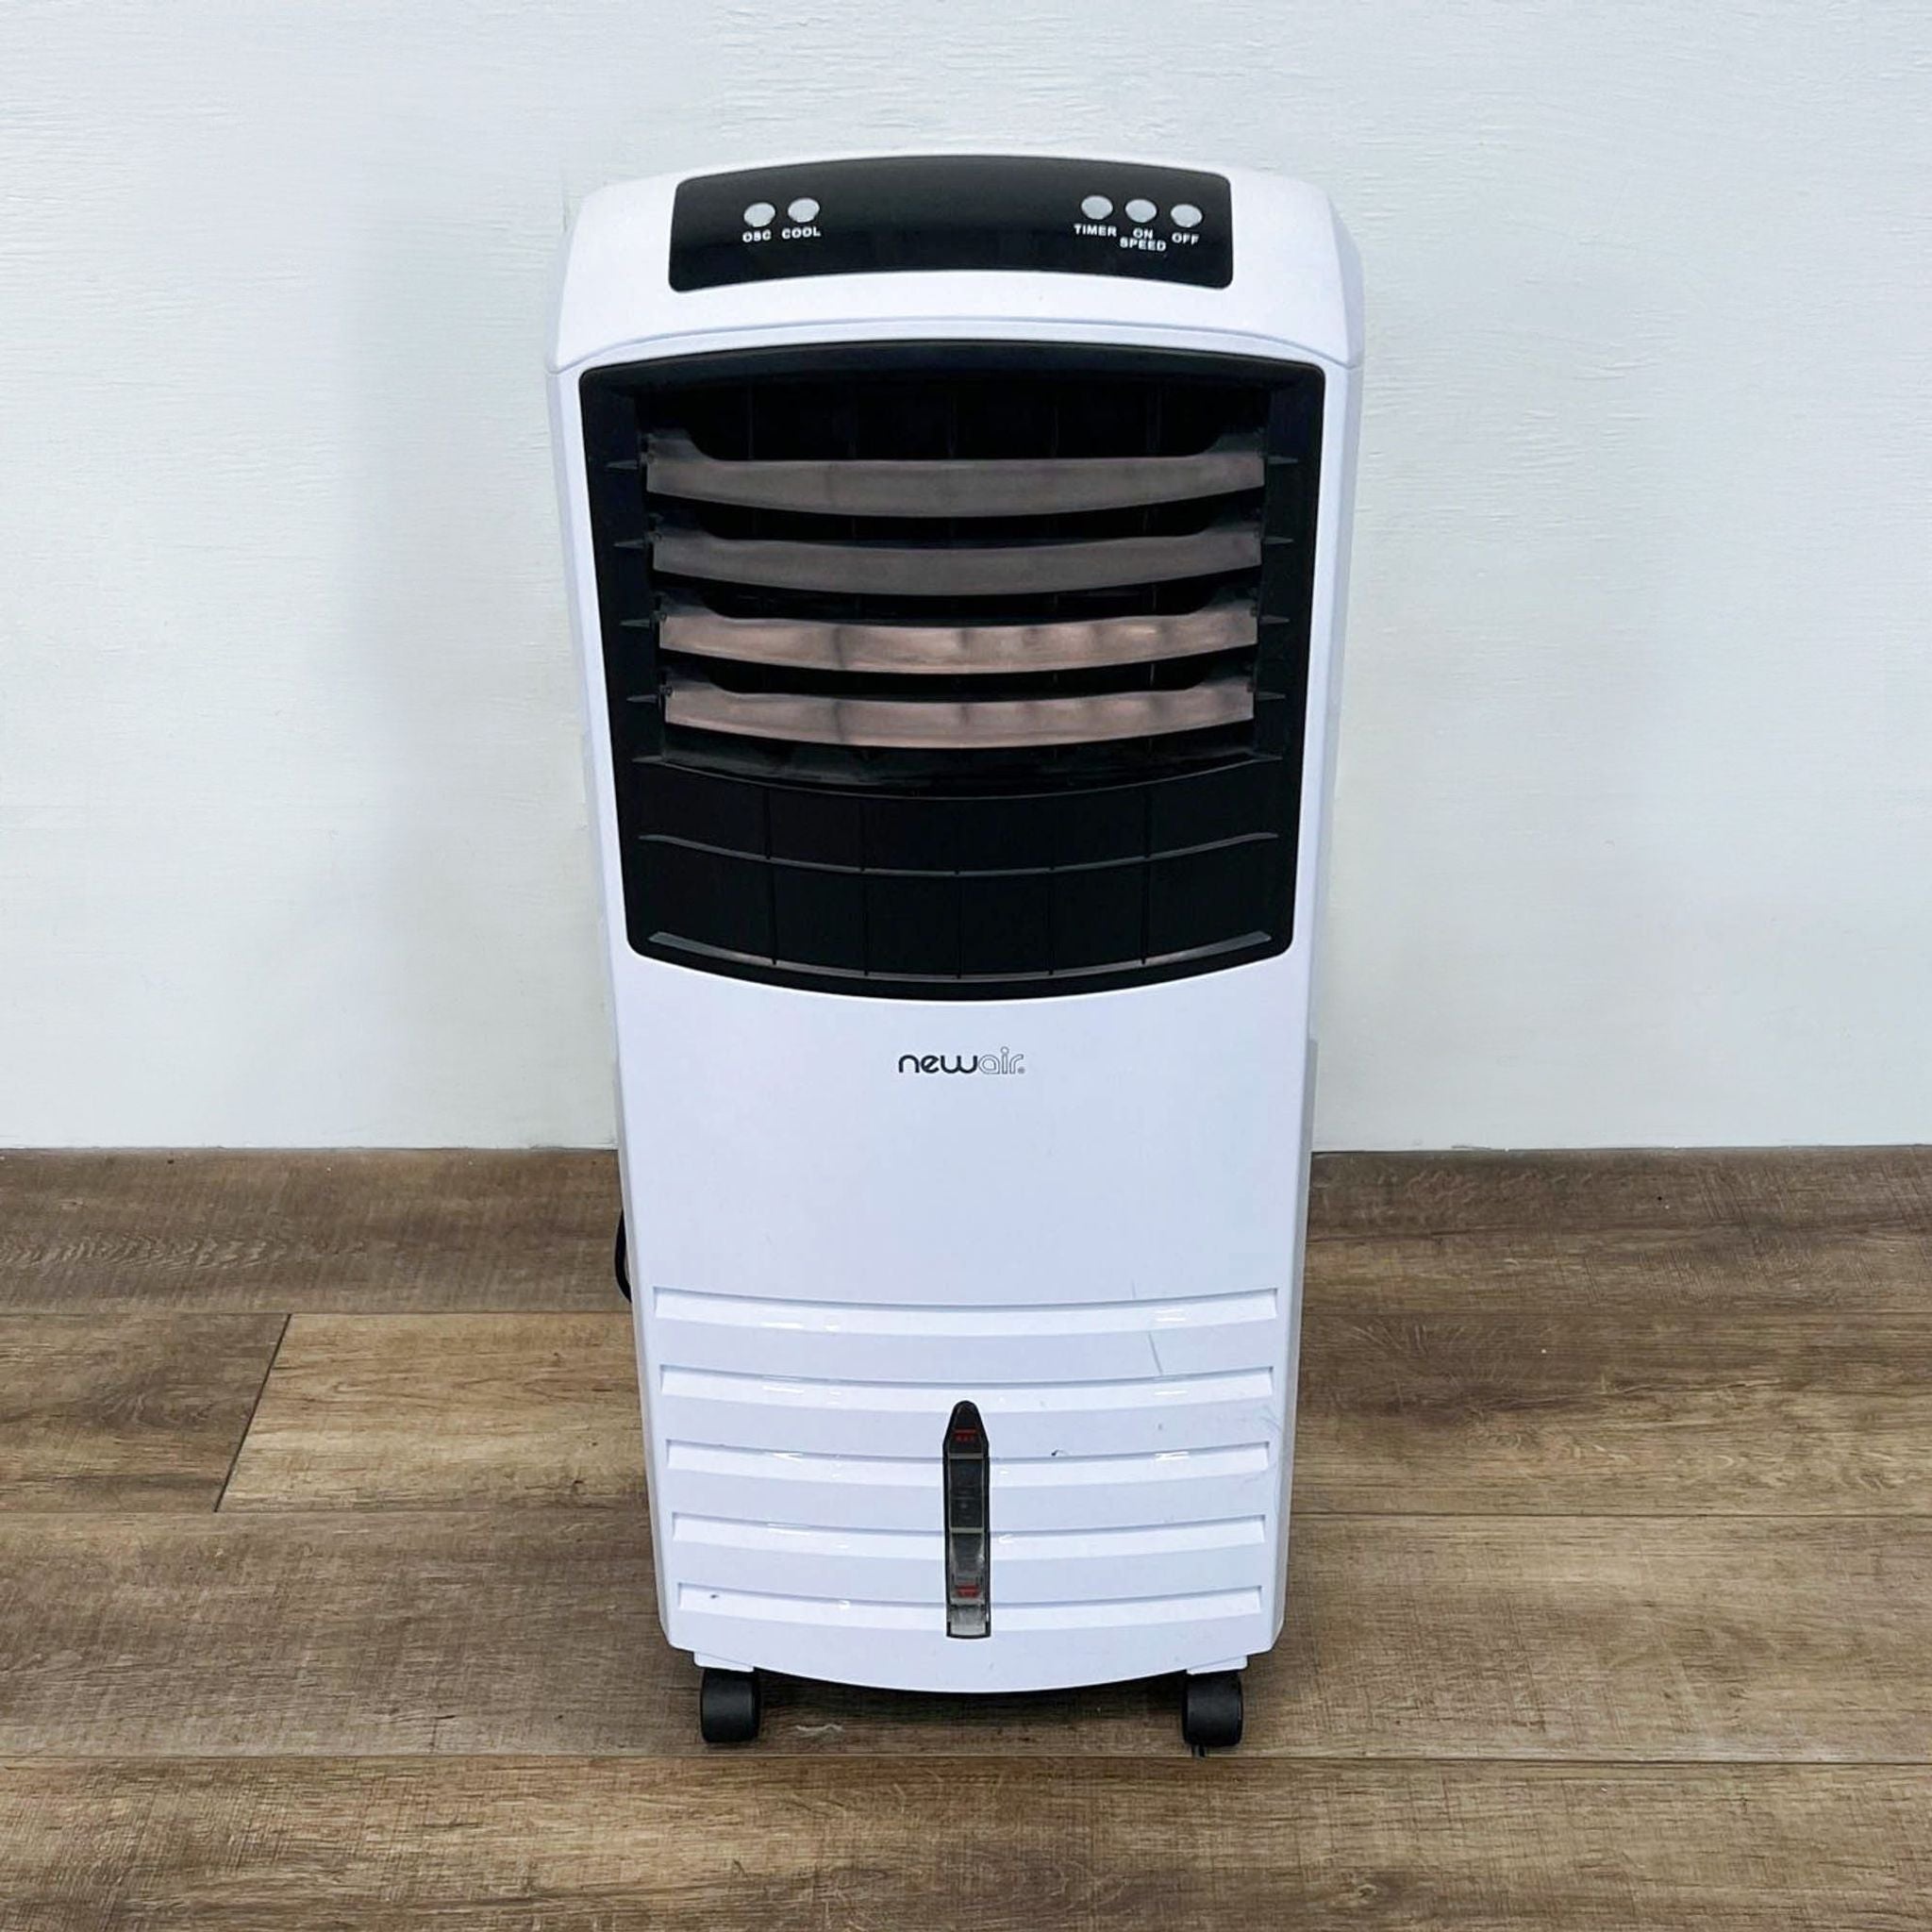 NewAir portable air cooler in white and black with control buttons visible, standing on a wooden floor against a white wall.